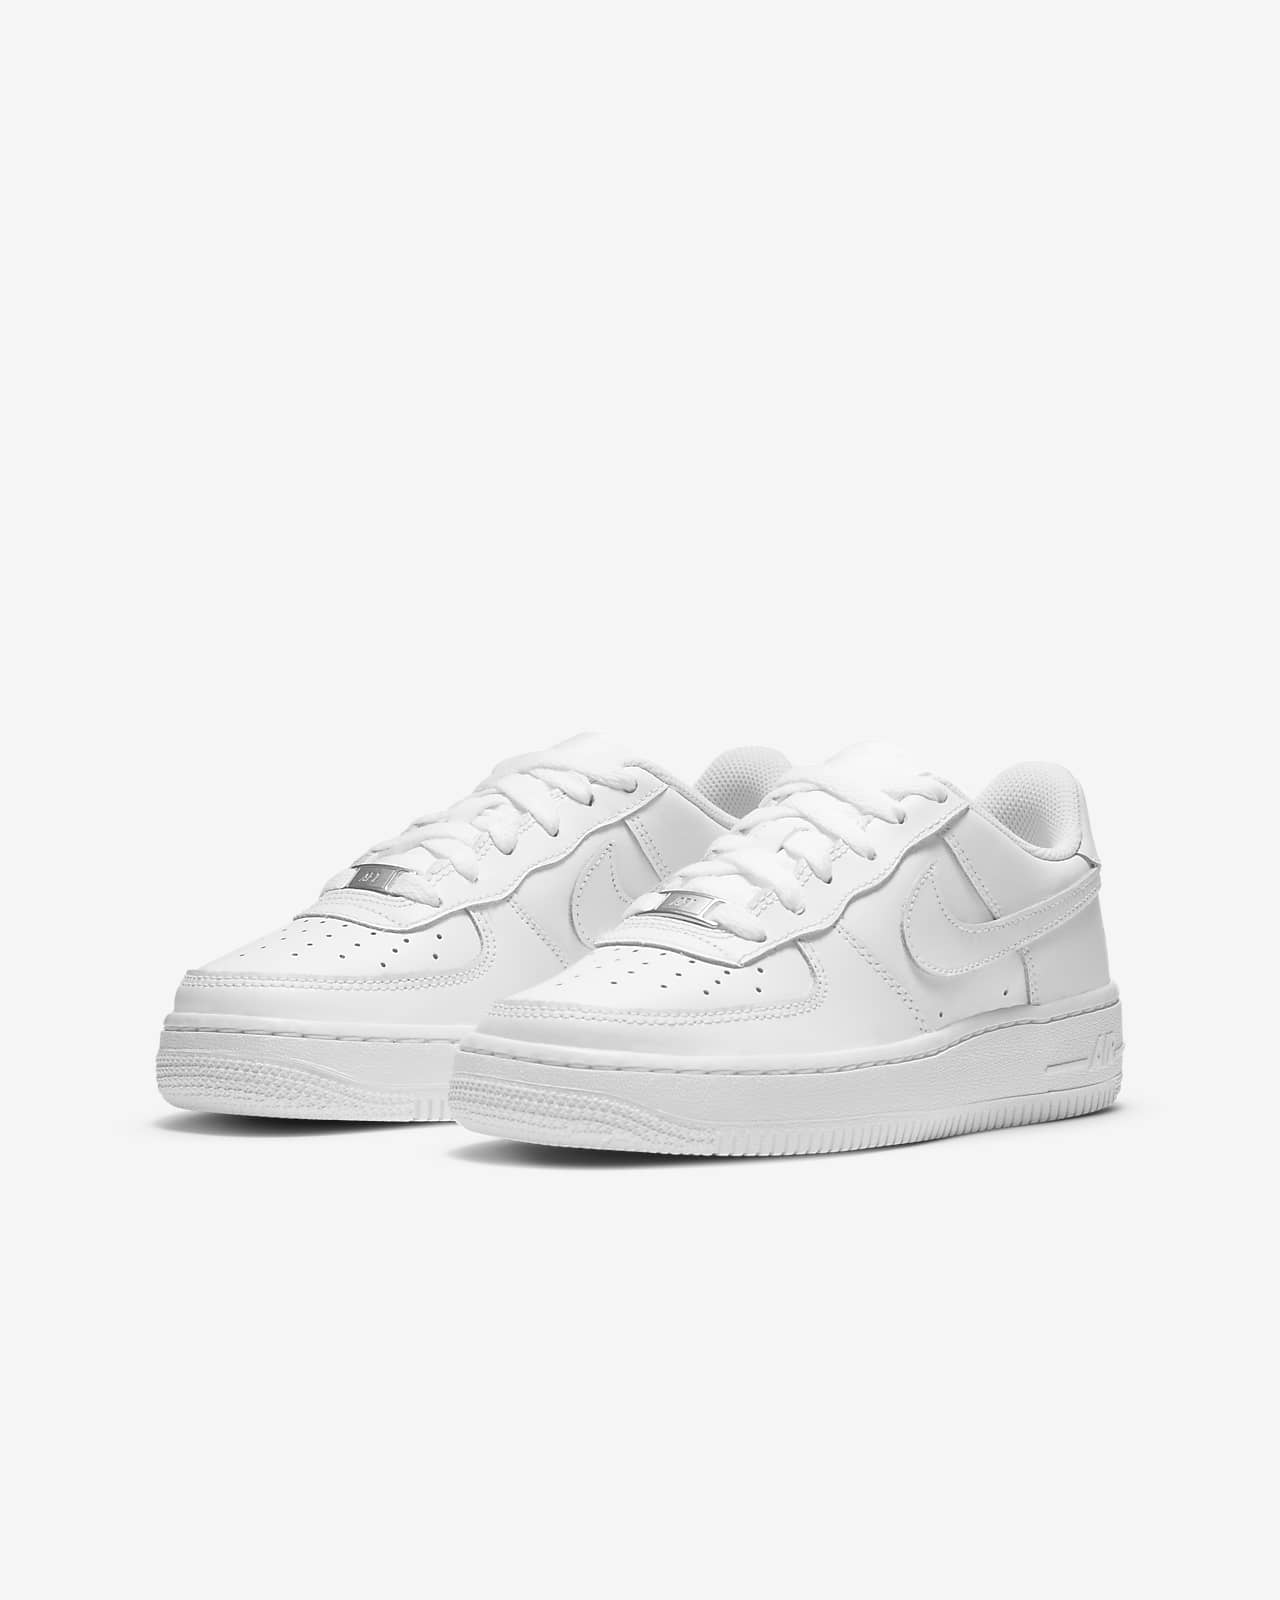 nike air force 1 junior size 3